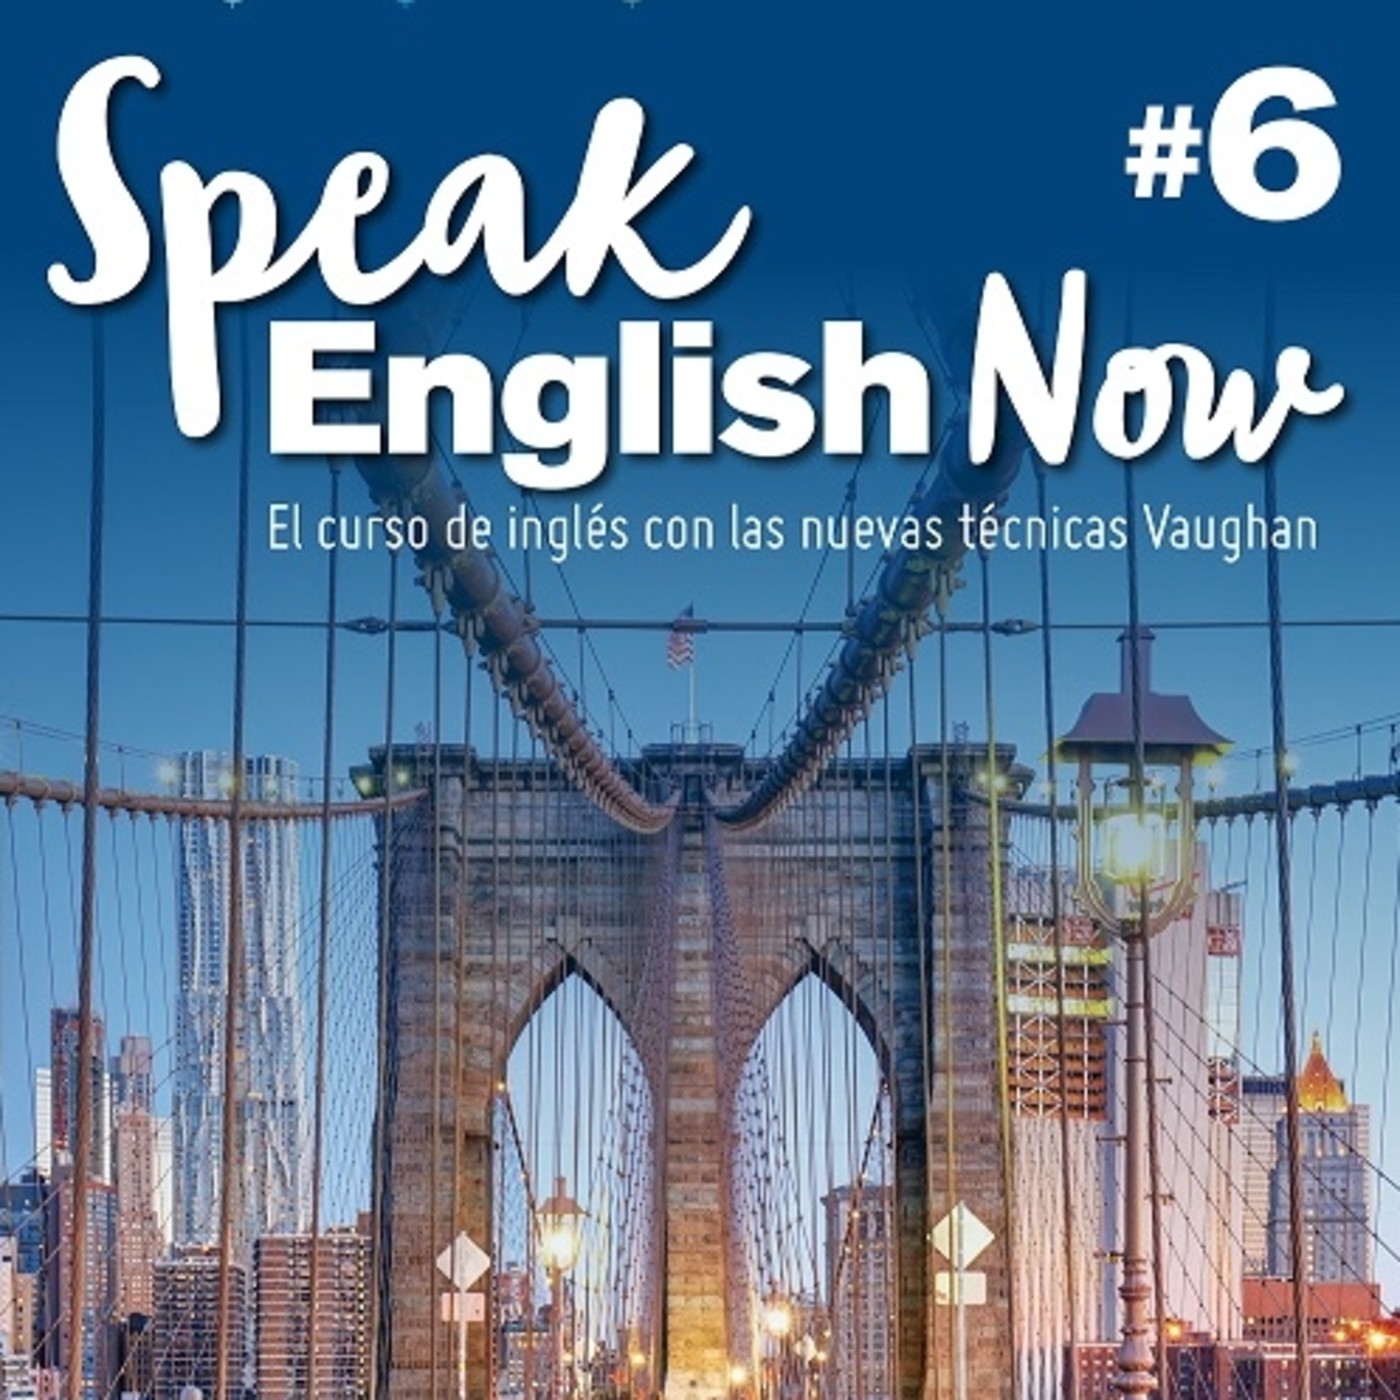 Speak English Now by Vaughan Libro 6